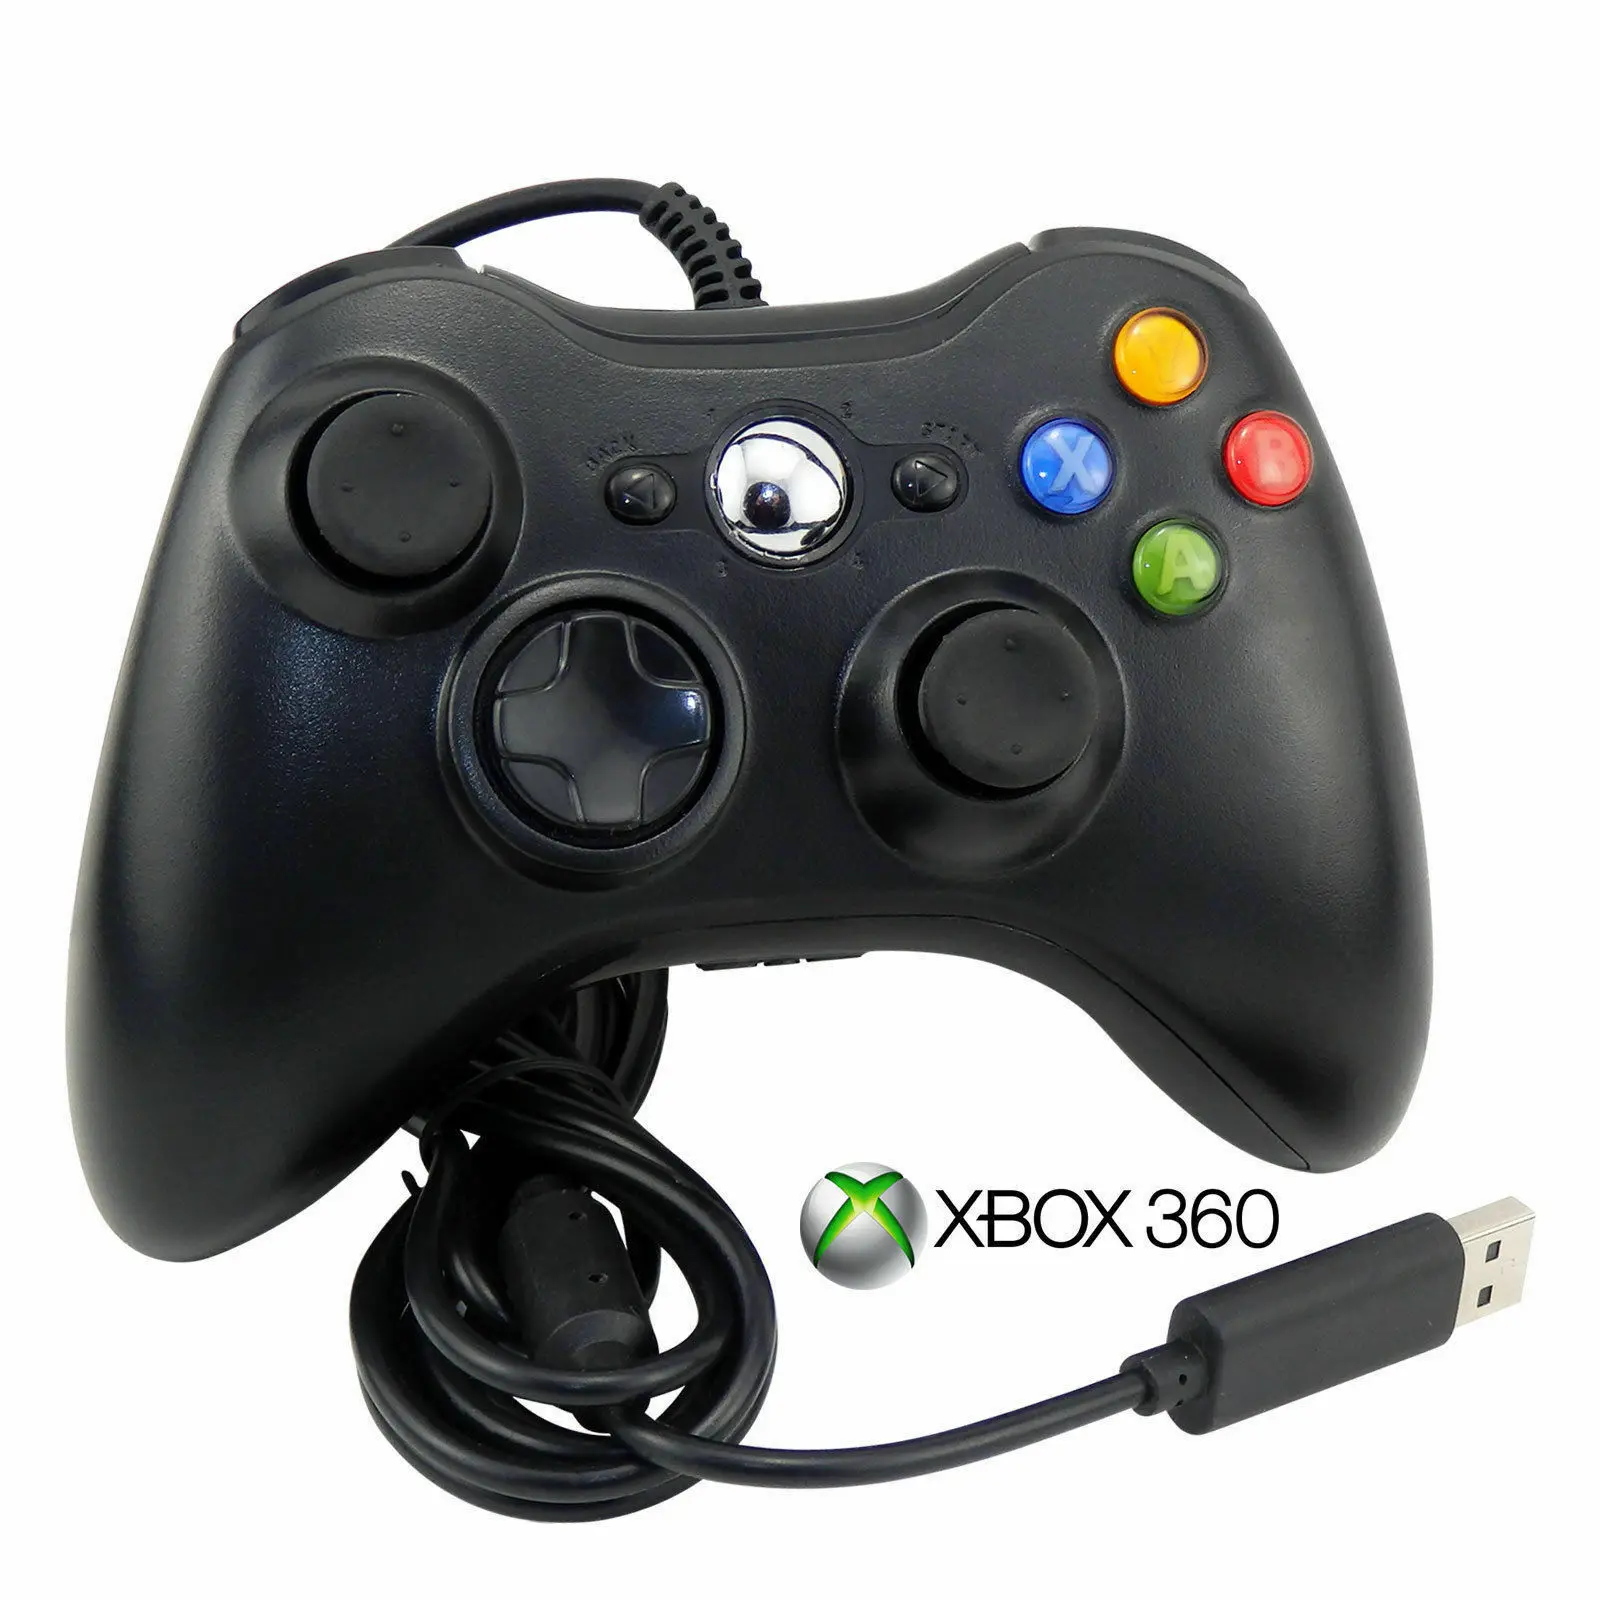 

Black Xbox 360 Controller USB Wired Game Pad For Microsoft Xbox 360 UK FAST POST